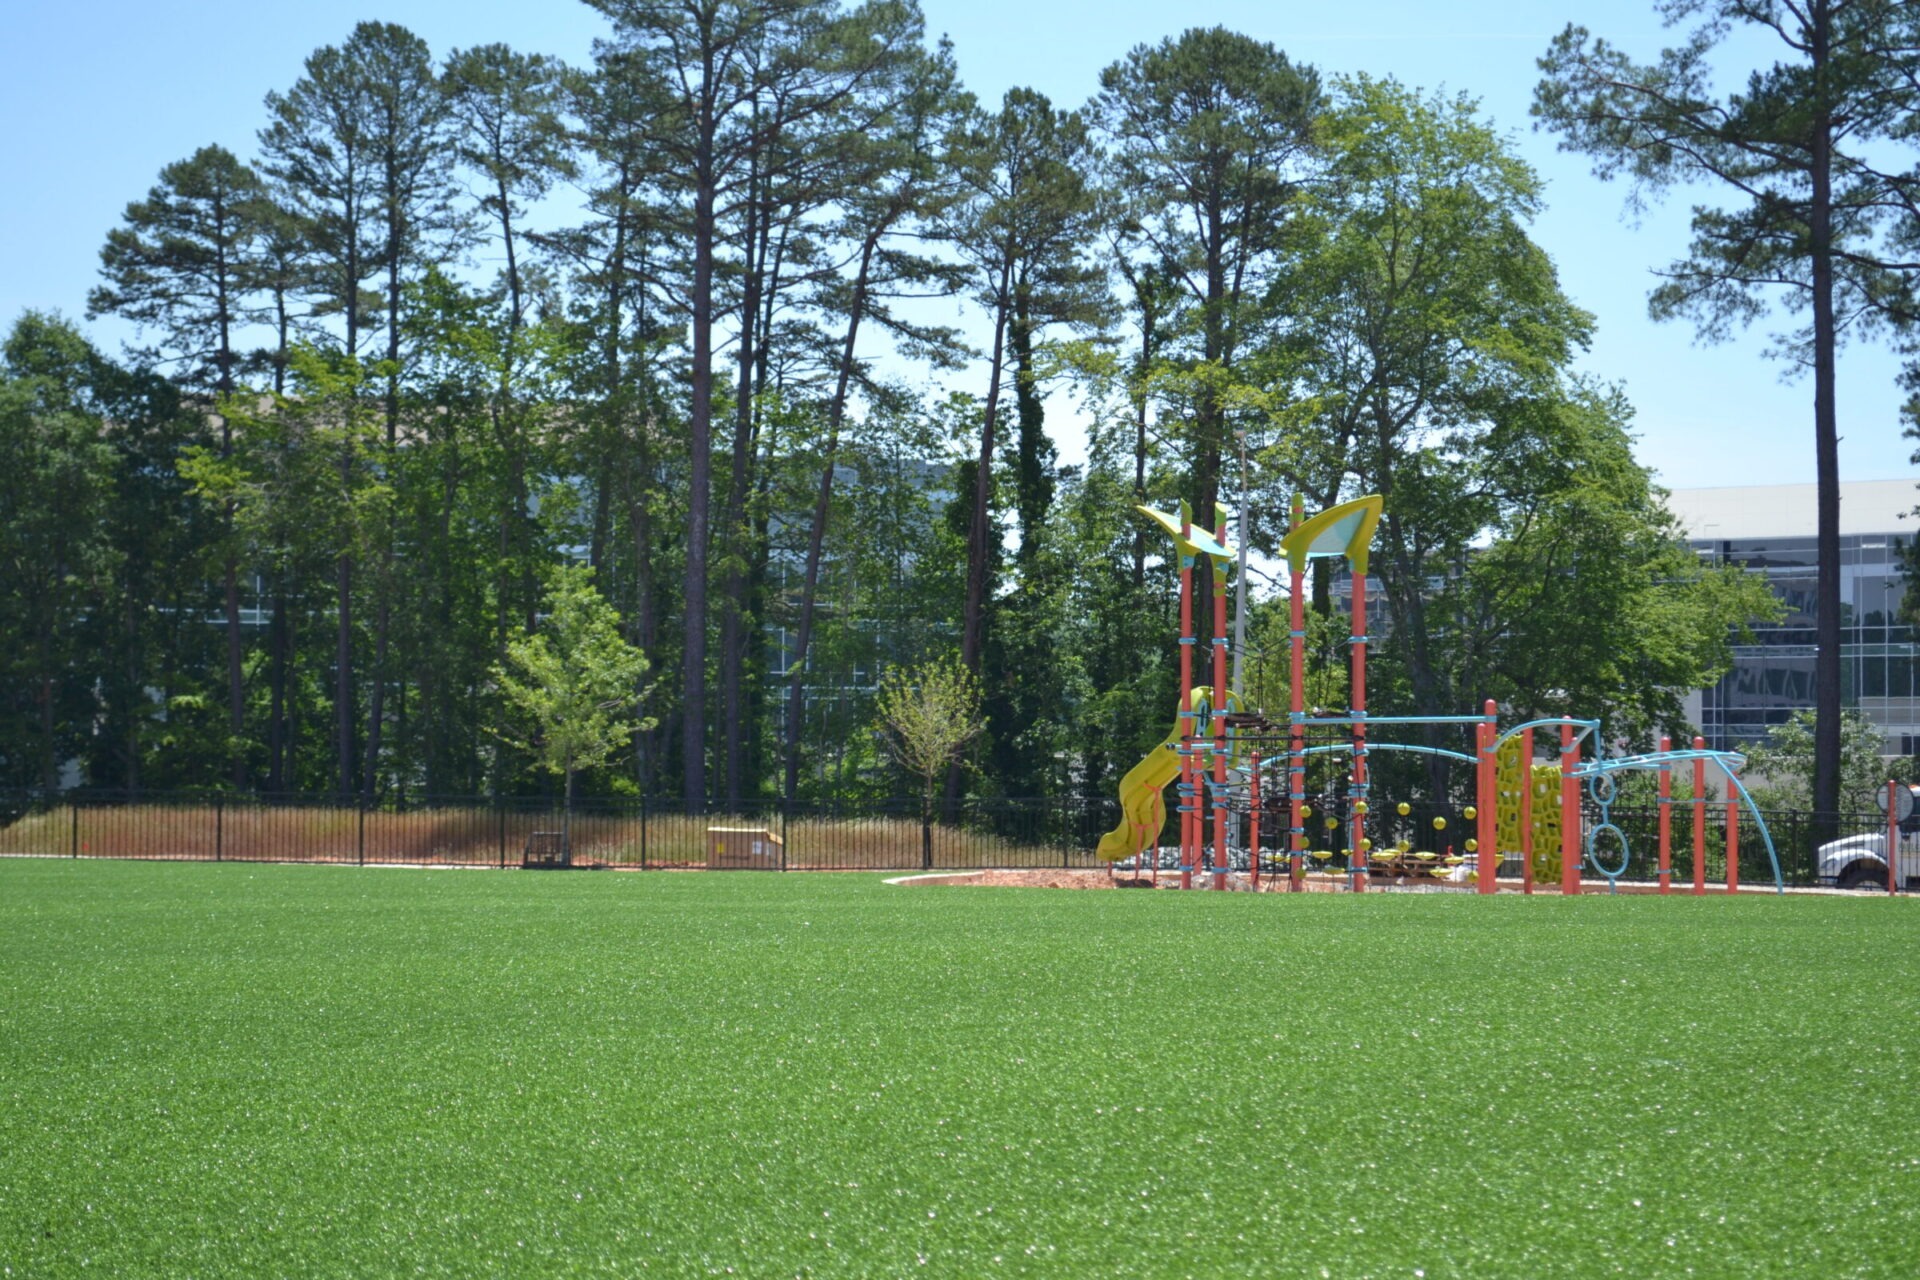 A playground with colorful equipment and slides set against a backdrop of tall trees and a clear blue sky, with an artificial turf foreground.